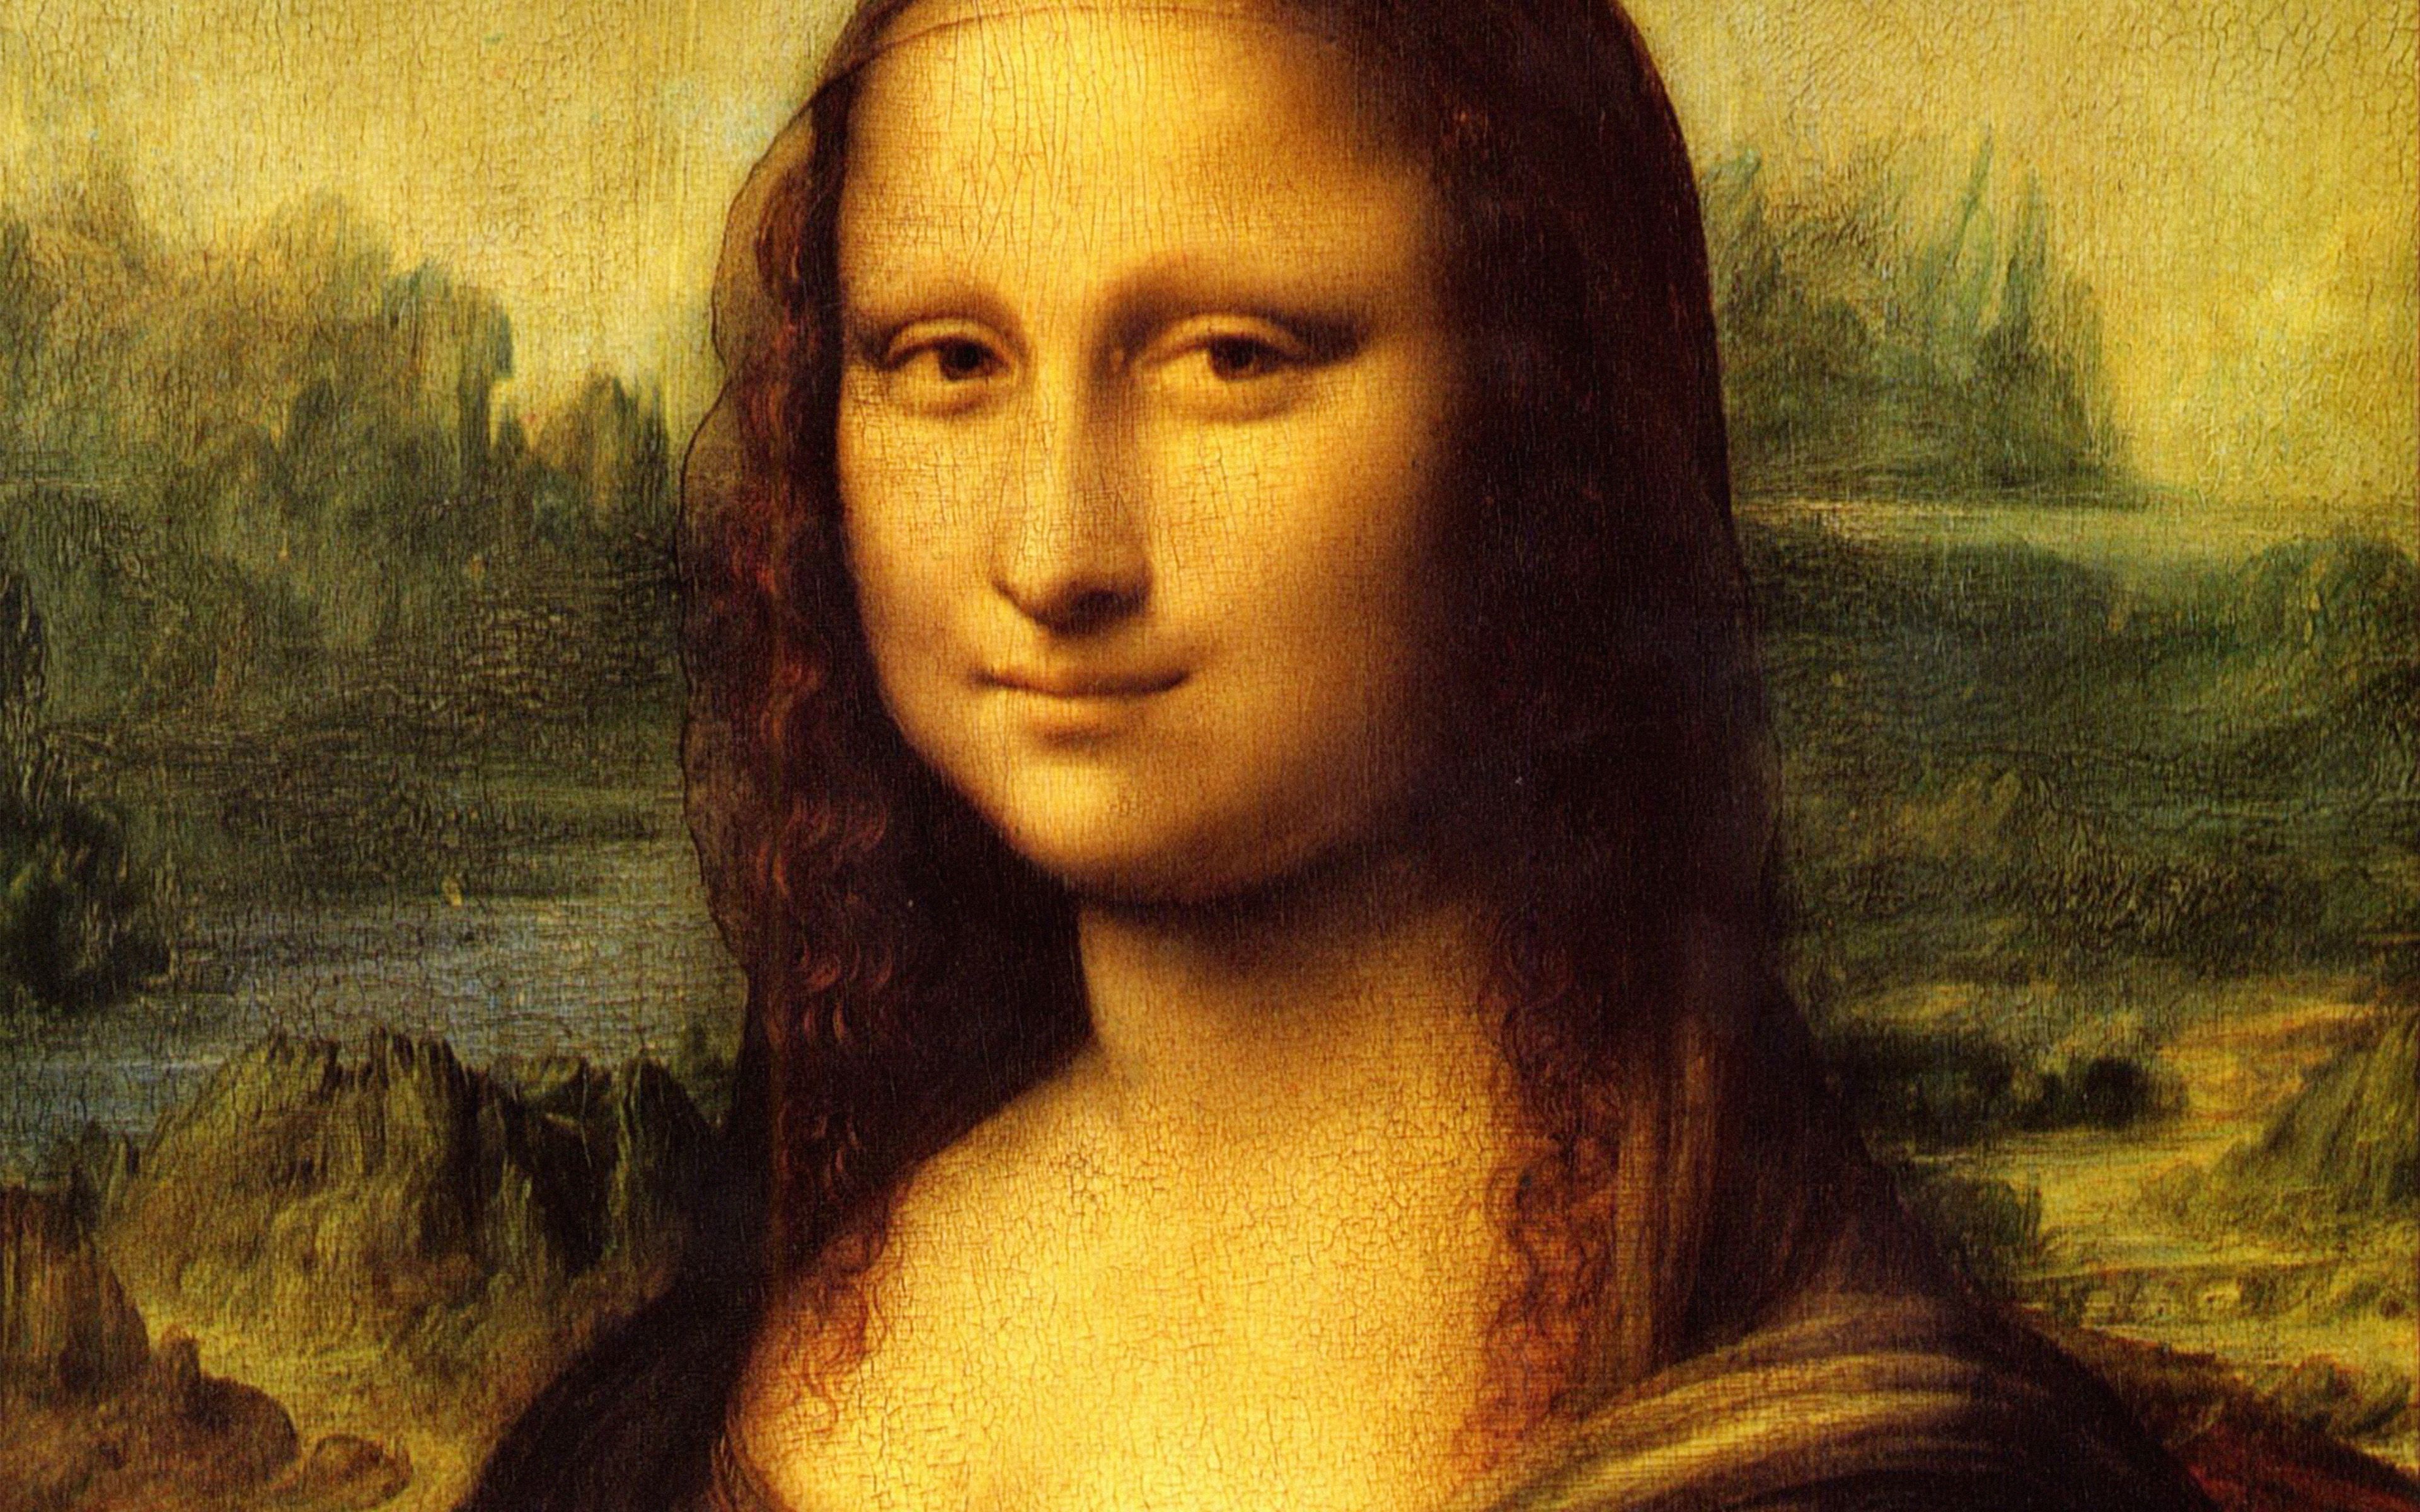 A close up of the Mona Lisa, showing her subtle smile and the creases around her eyes. - Mona Lisa